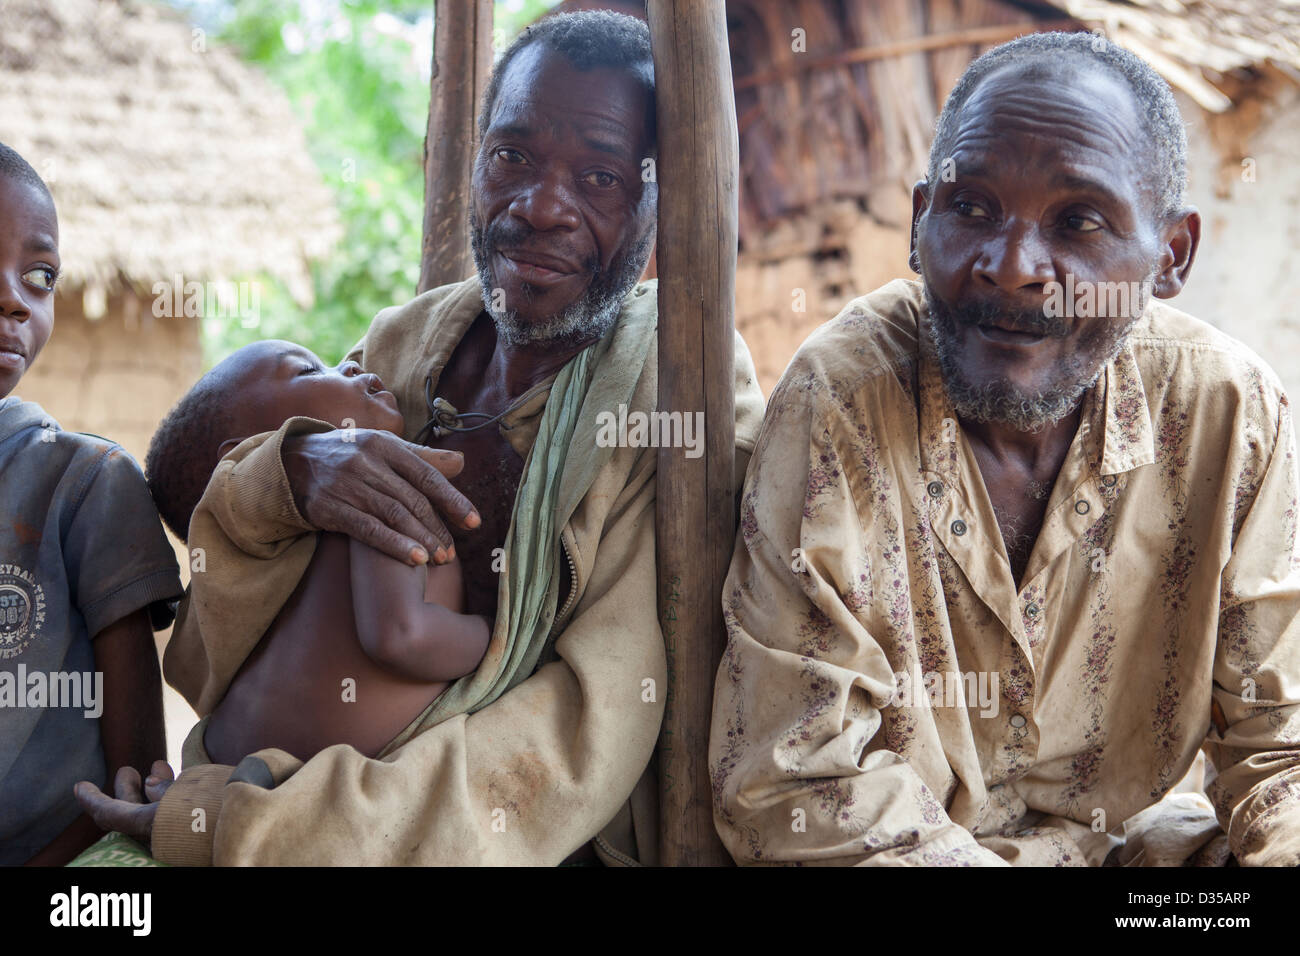 CONGO, 26th Sept 2012: A community of Bata pigmy people, Sieh village.  They used to hunt elephant. Stock Photo